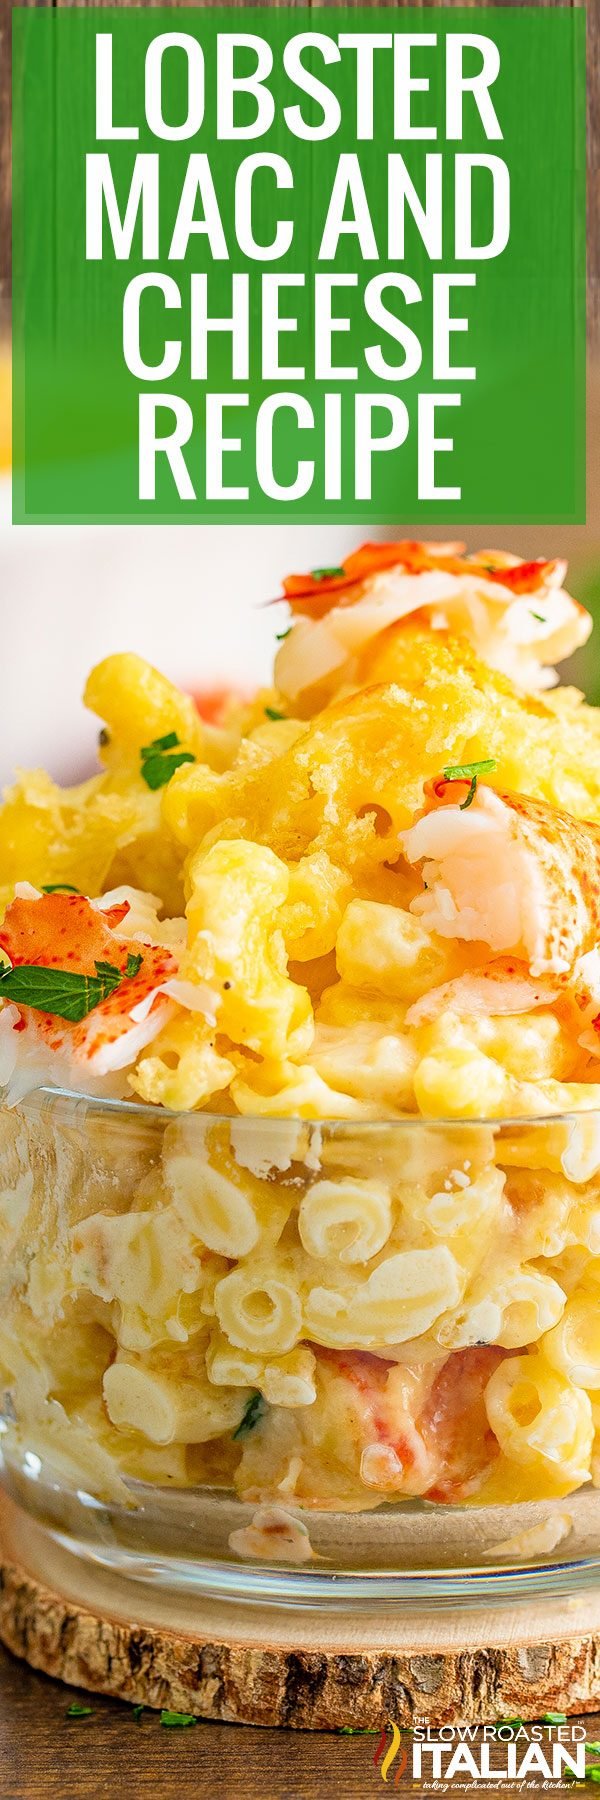 titled image (and shown): lobster mac and cheese recipe